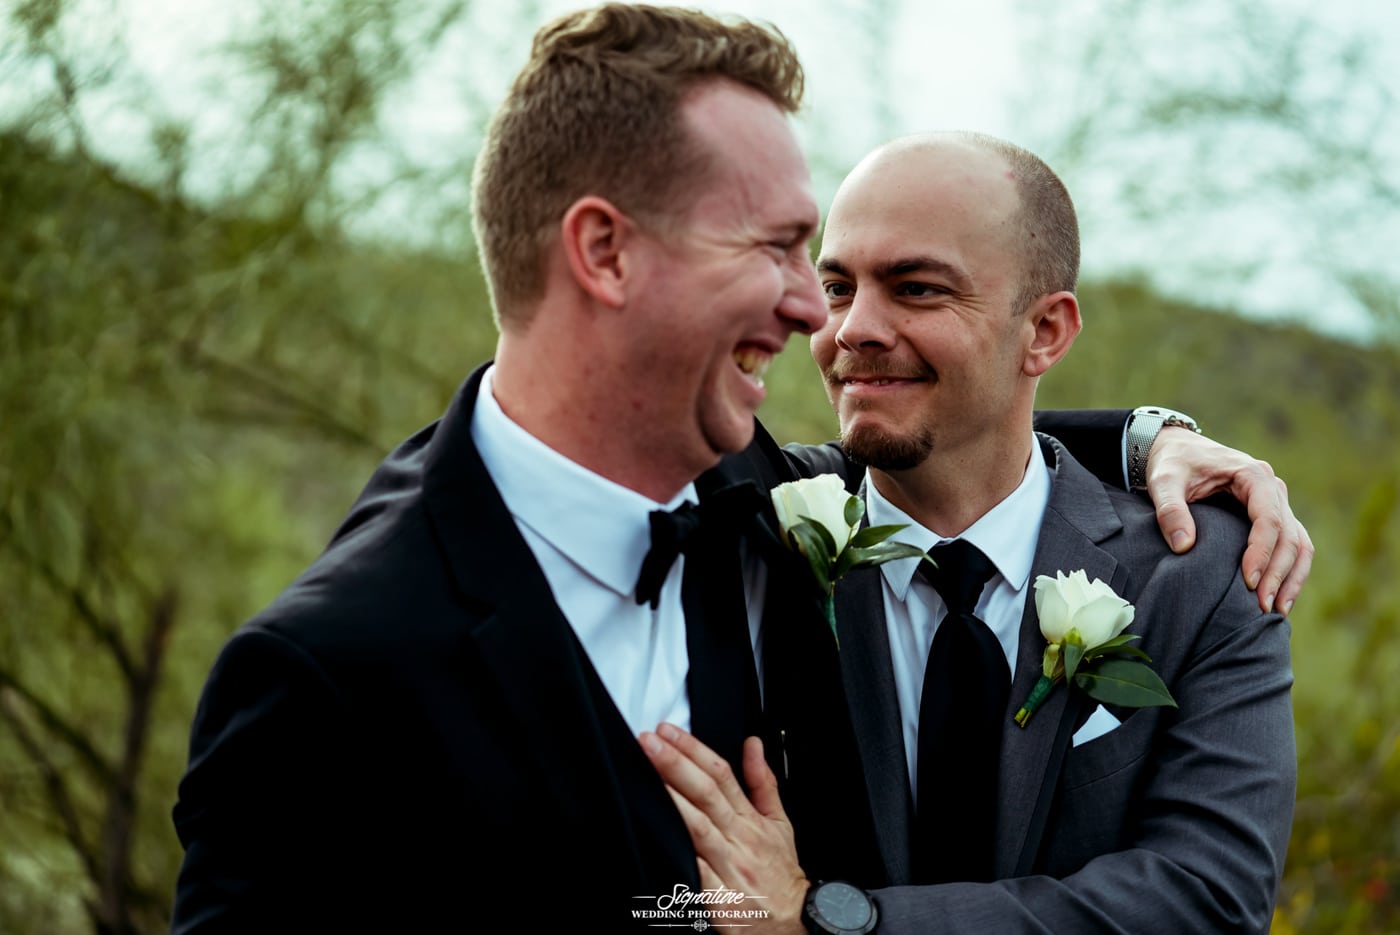 Groom and best man smiling candid